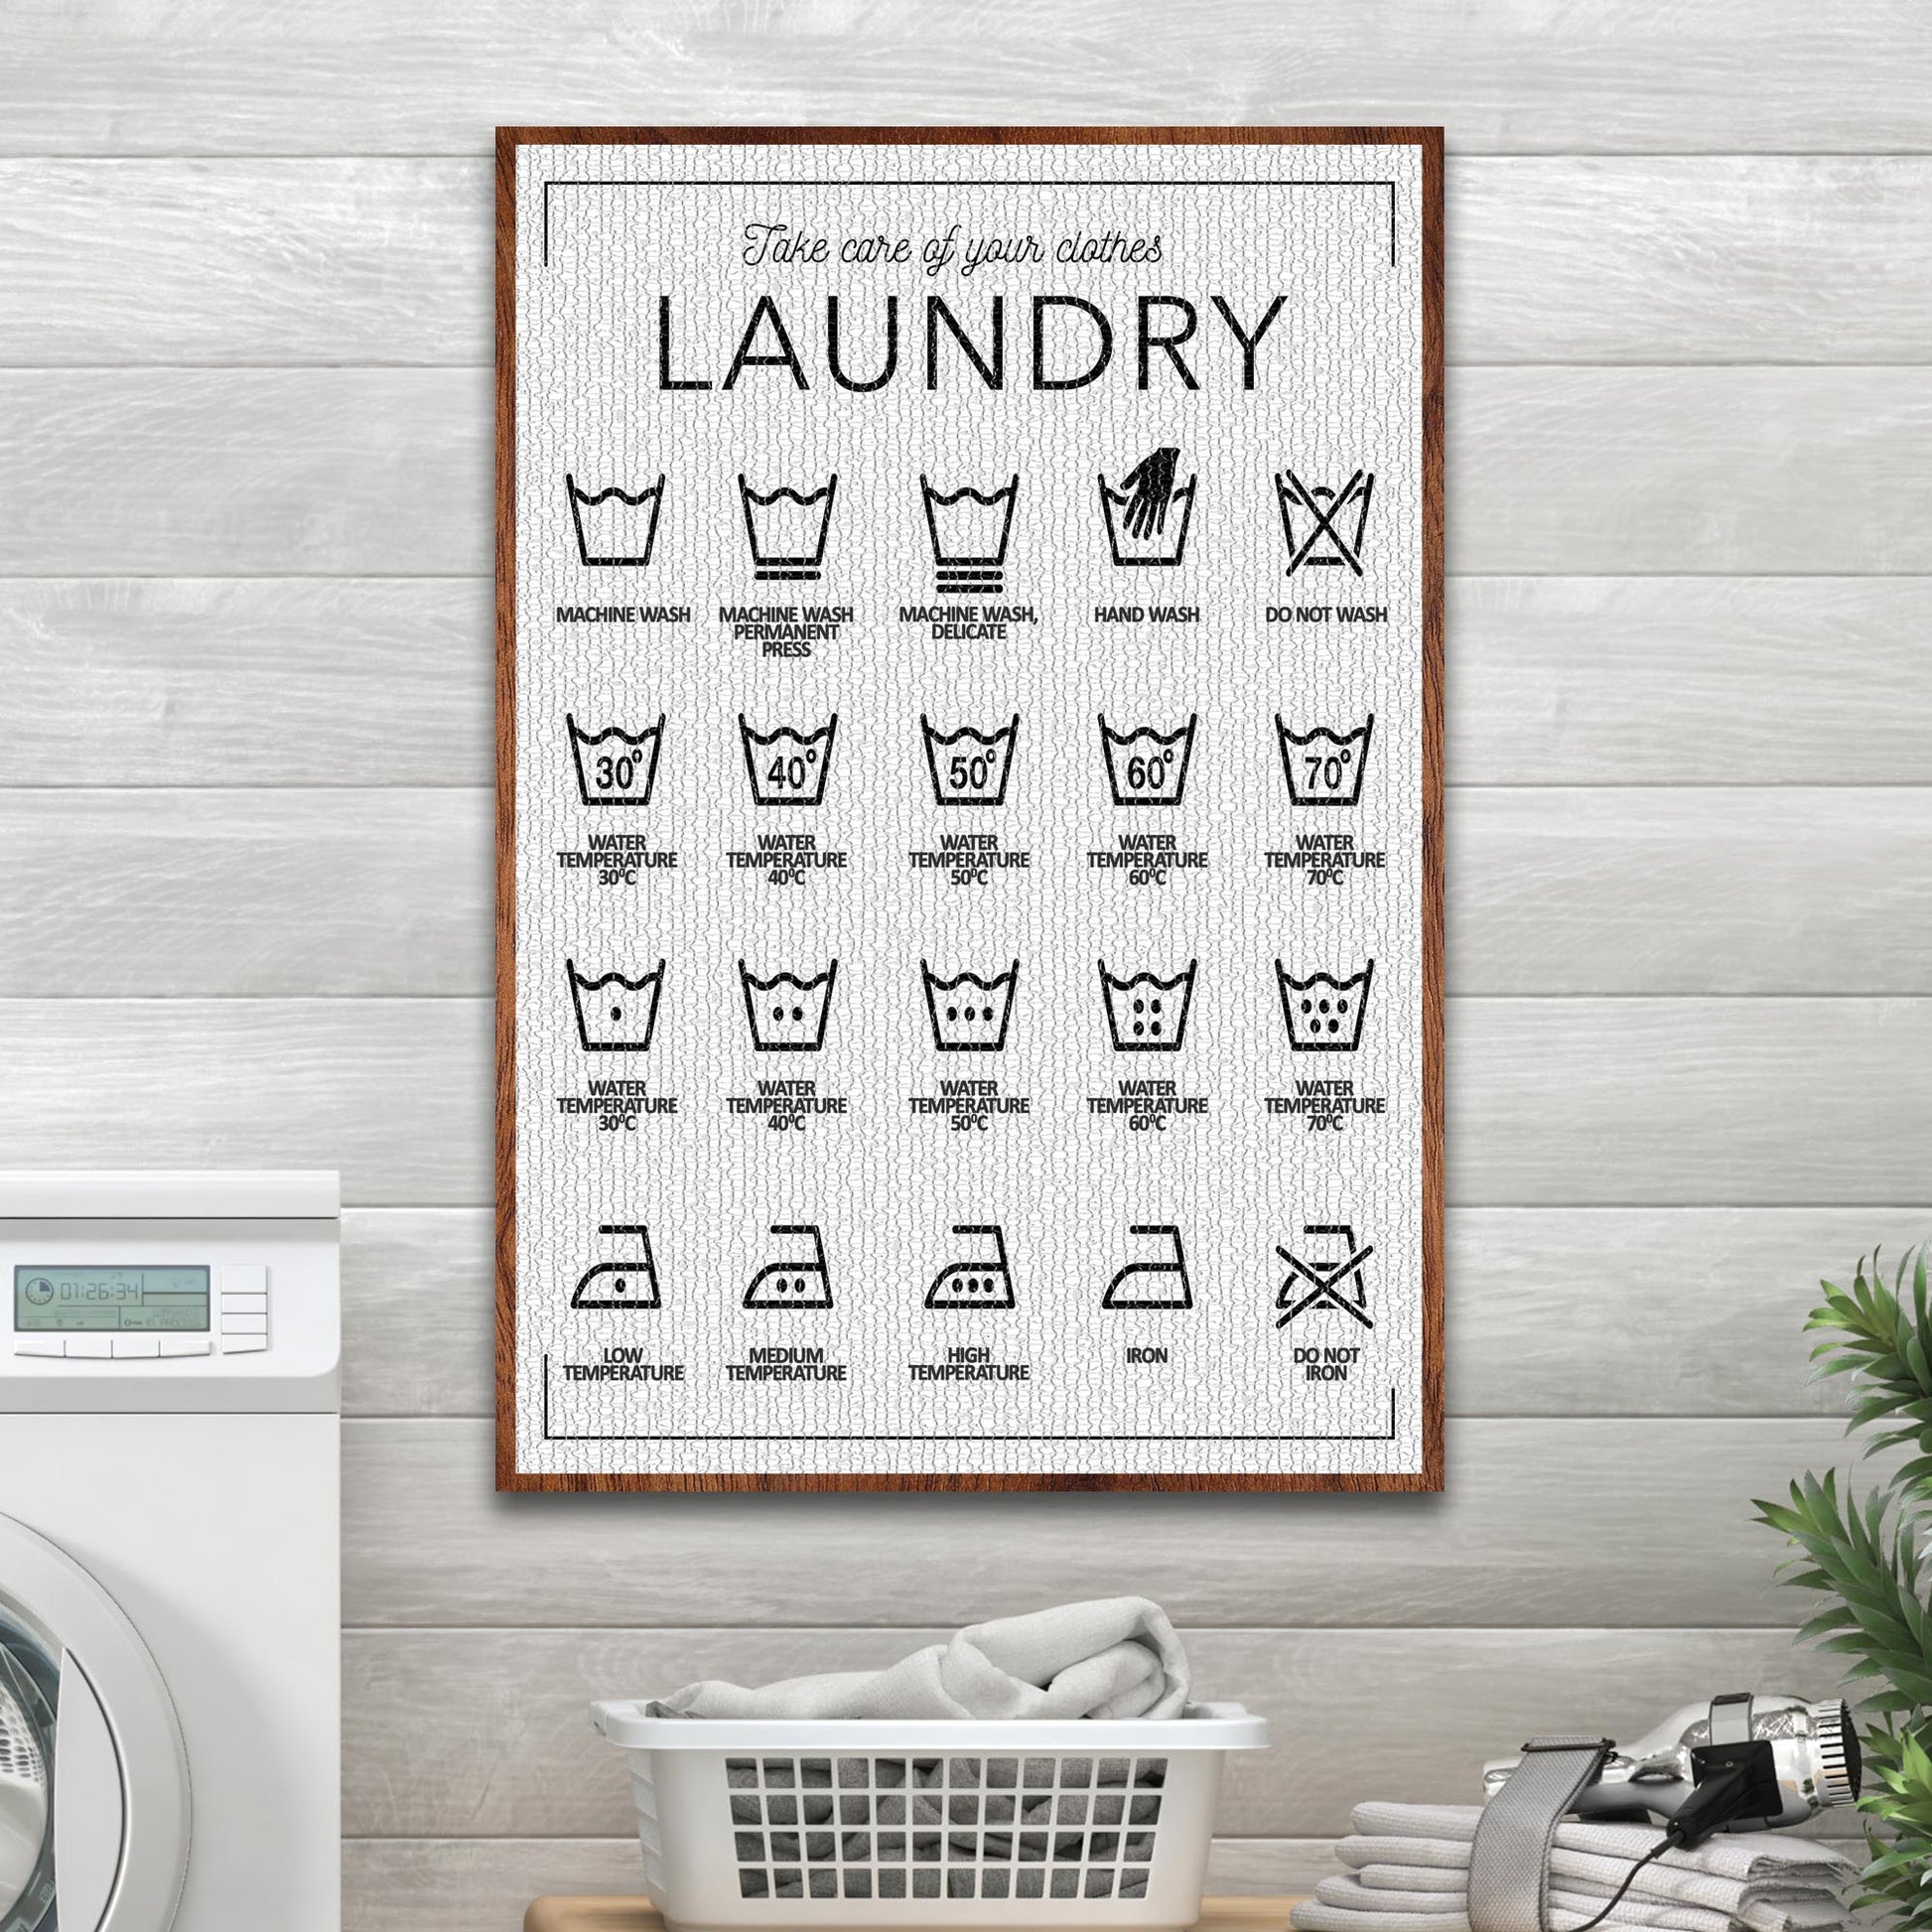 Laundry Symbols Sign II - Image by Tailored Canvases